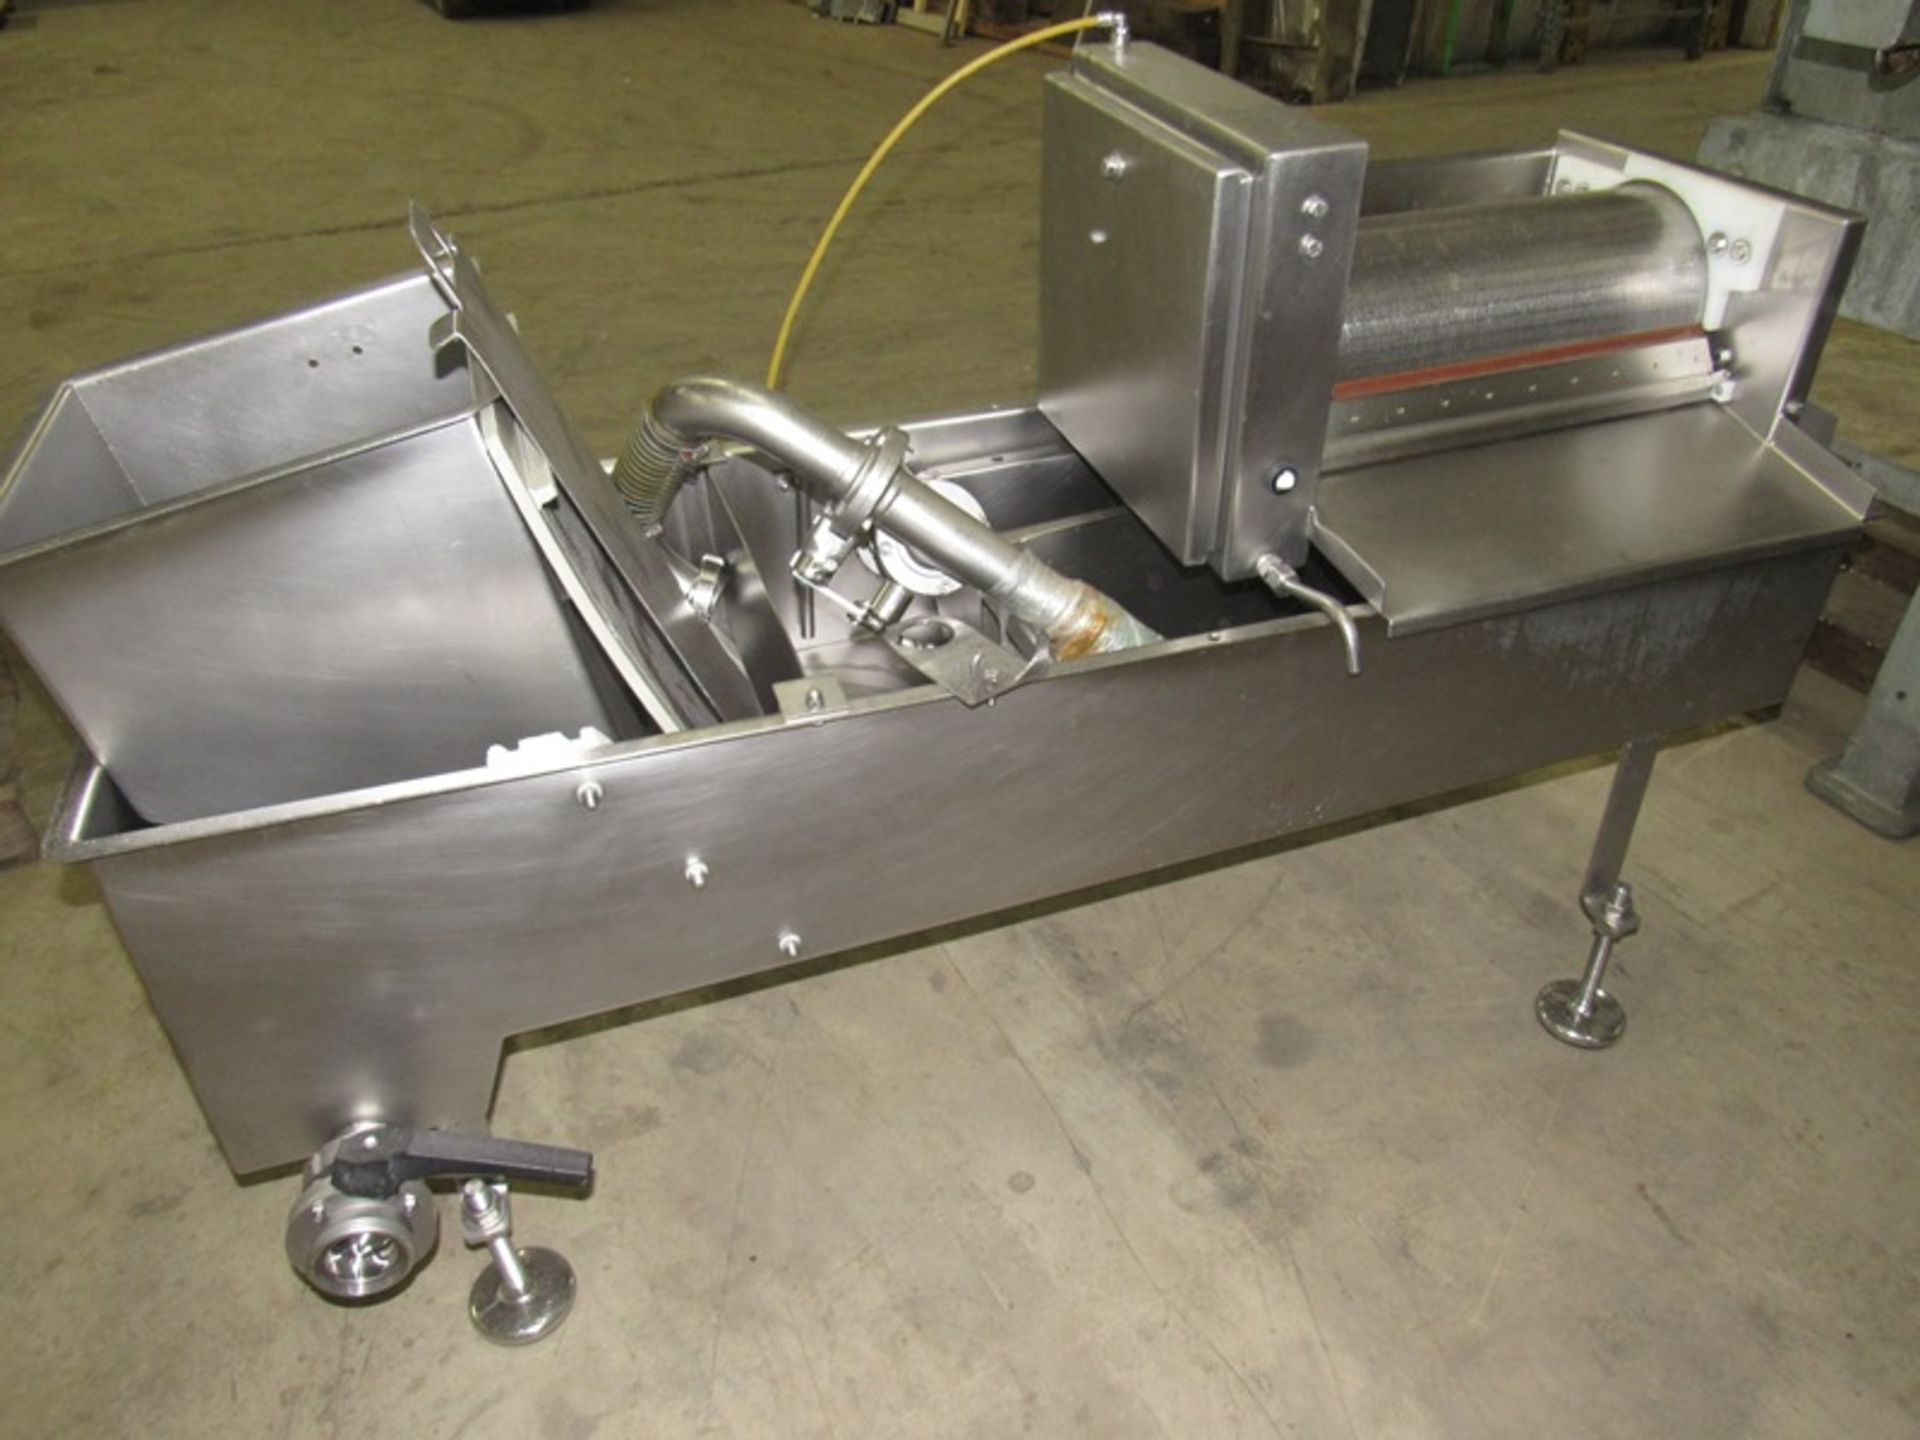 Townsend Mdl. PI 128/270 Pickle Injector, 128 needles, 16" wide walking beam conveyor, complete with - Image 5 of 6